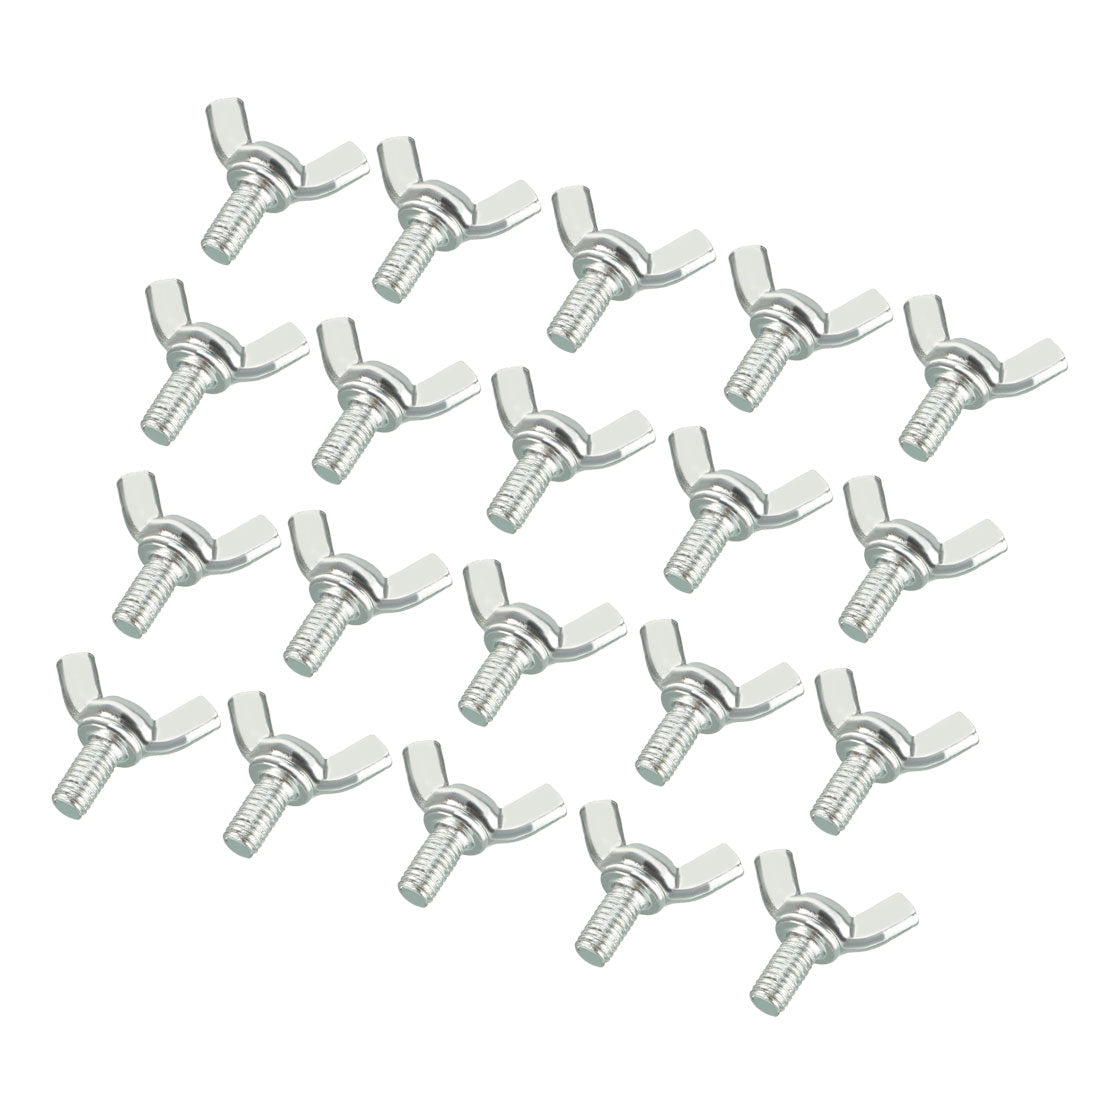 uxcell Uxcell Wingbolt Butterfly Wing Thumb Hand Screws Bolts M5x10mm 0.8mm Pitch Carbon Steel 20pcs